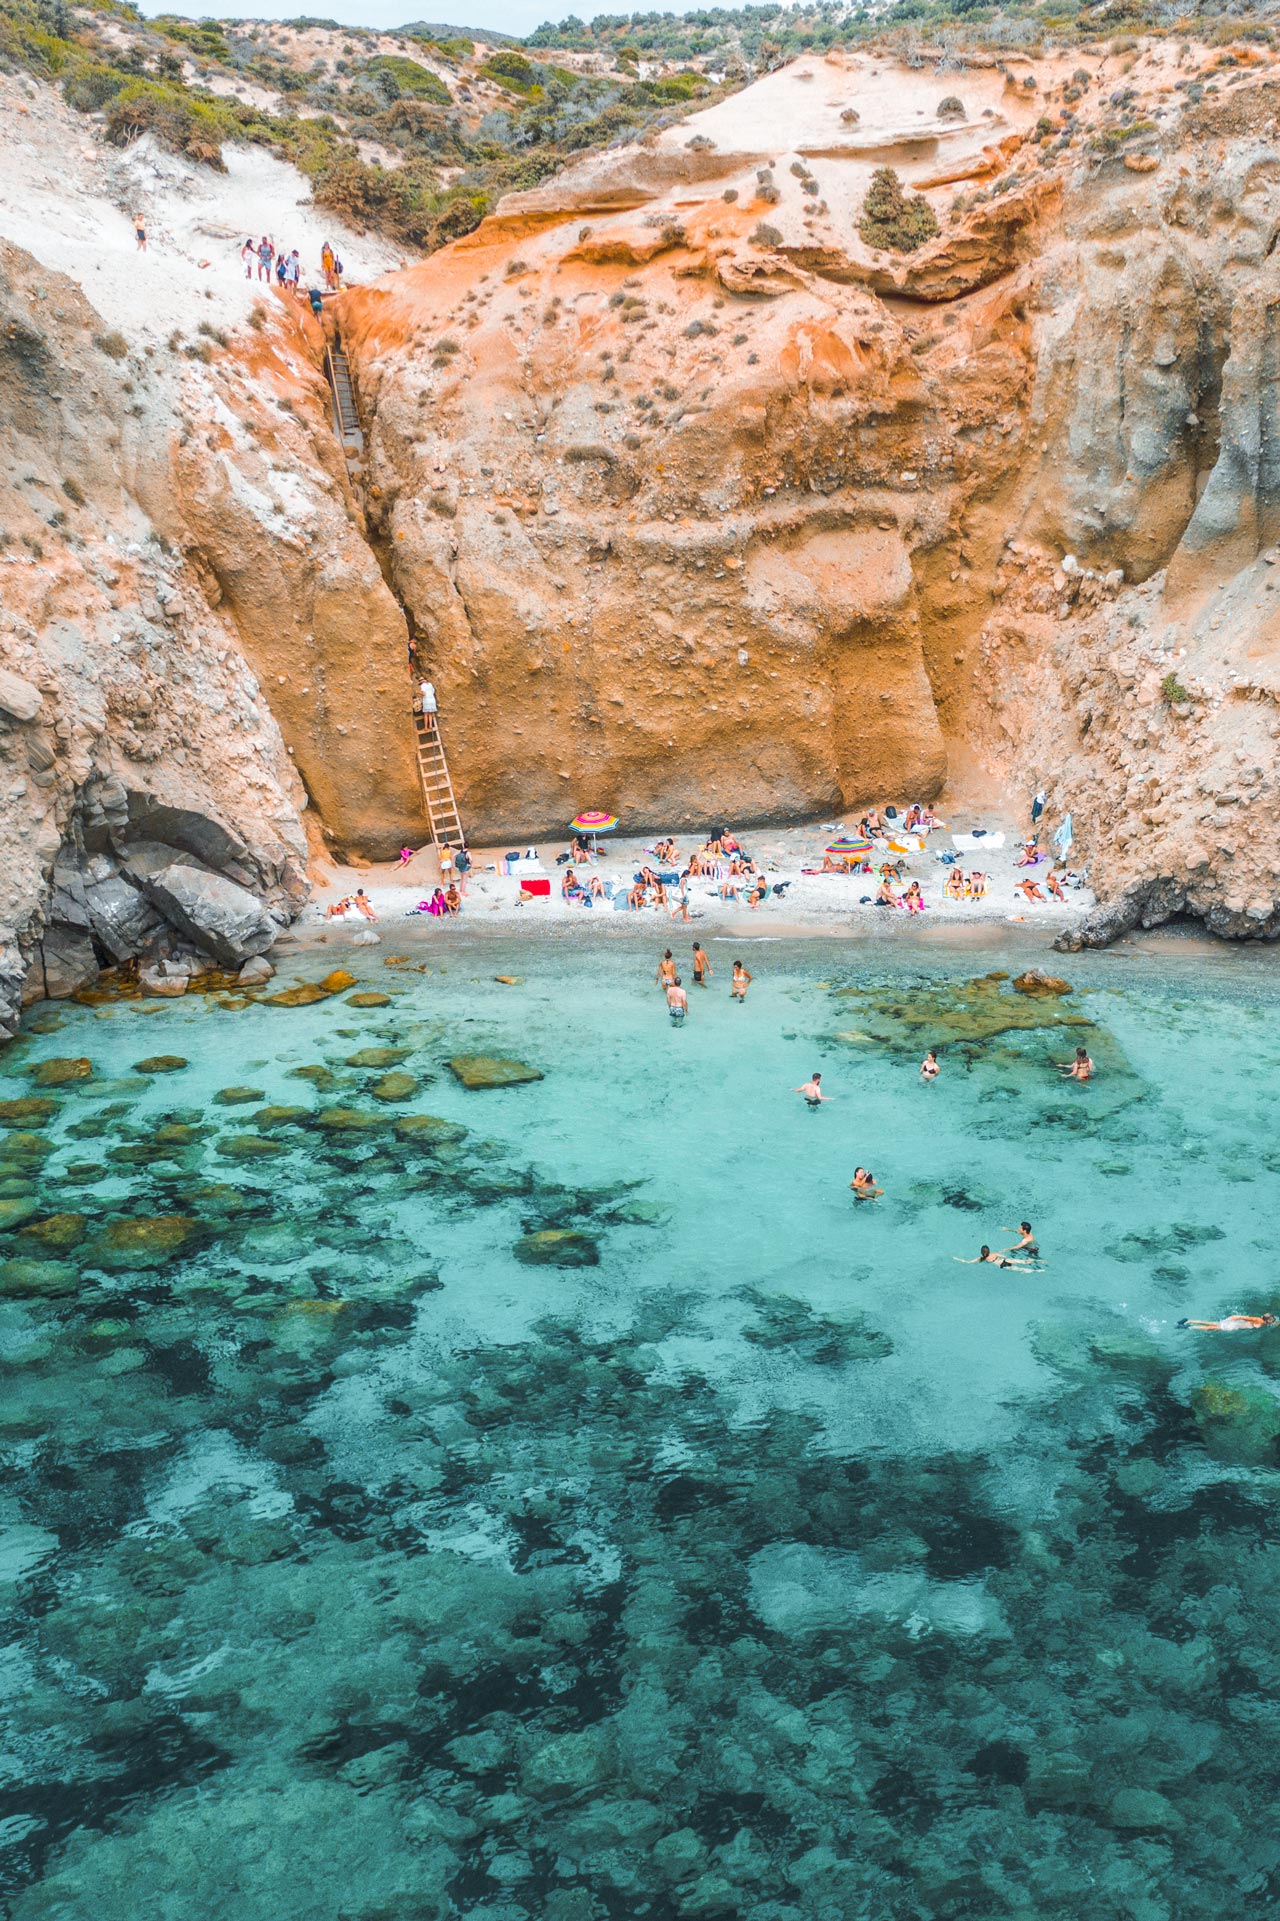 Nestled beneath vertical cliffs, this small beach offers wonderful isolation and beautiful swimming